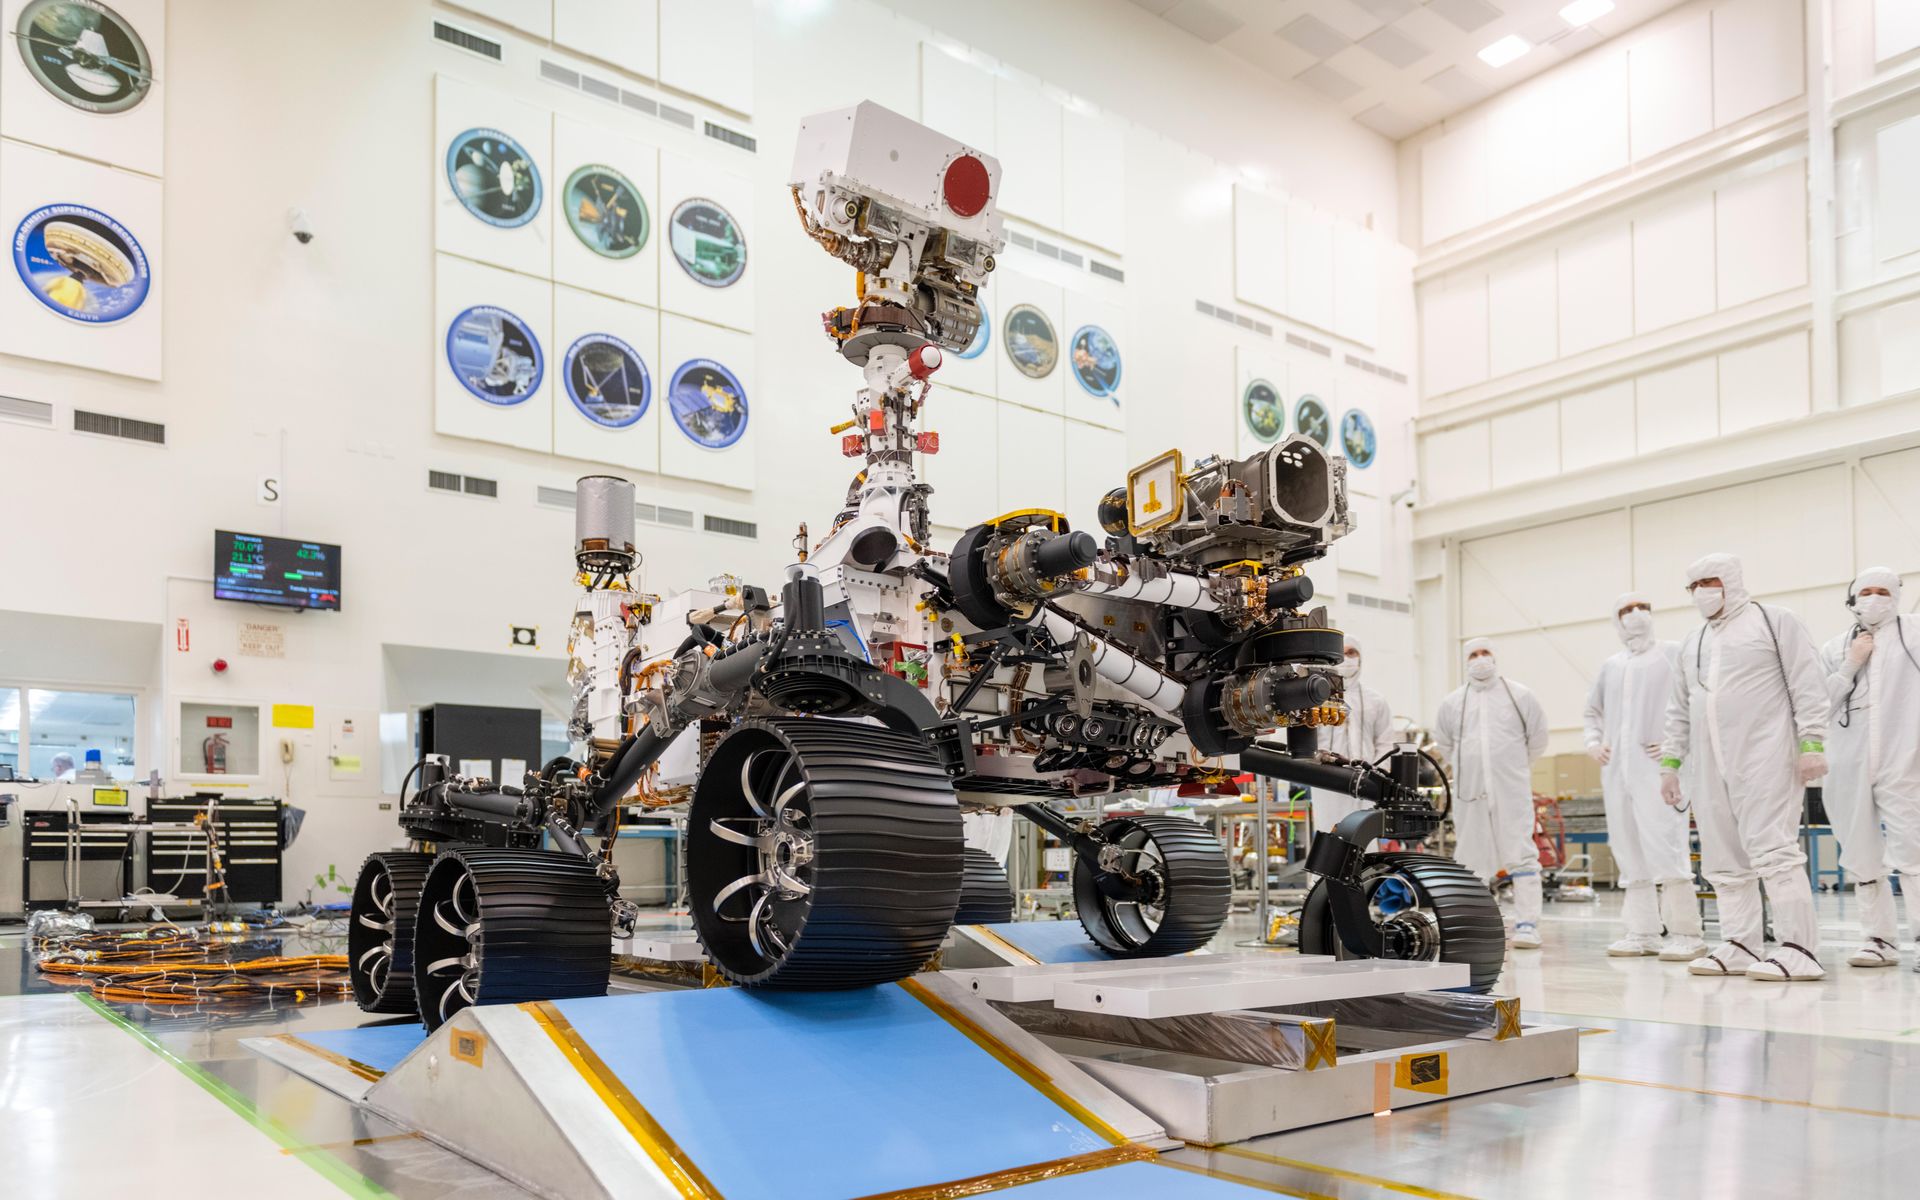 PHOTO: In a clean room at NASA's Jet Propulsion Laboratory in Pasadena, Calif., engineers observed the first driving test for NASA's Mars 2020 rover on Dec. 17, 2019.